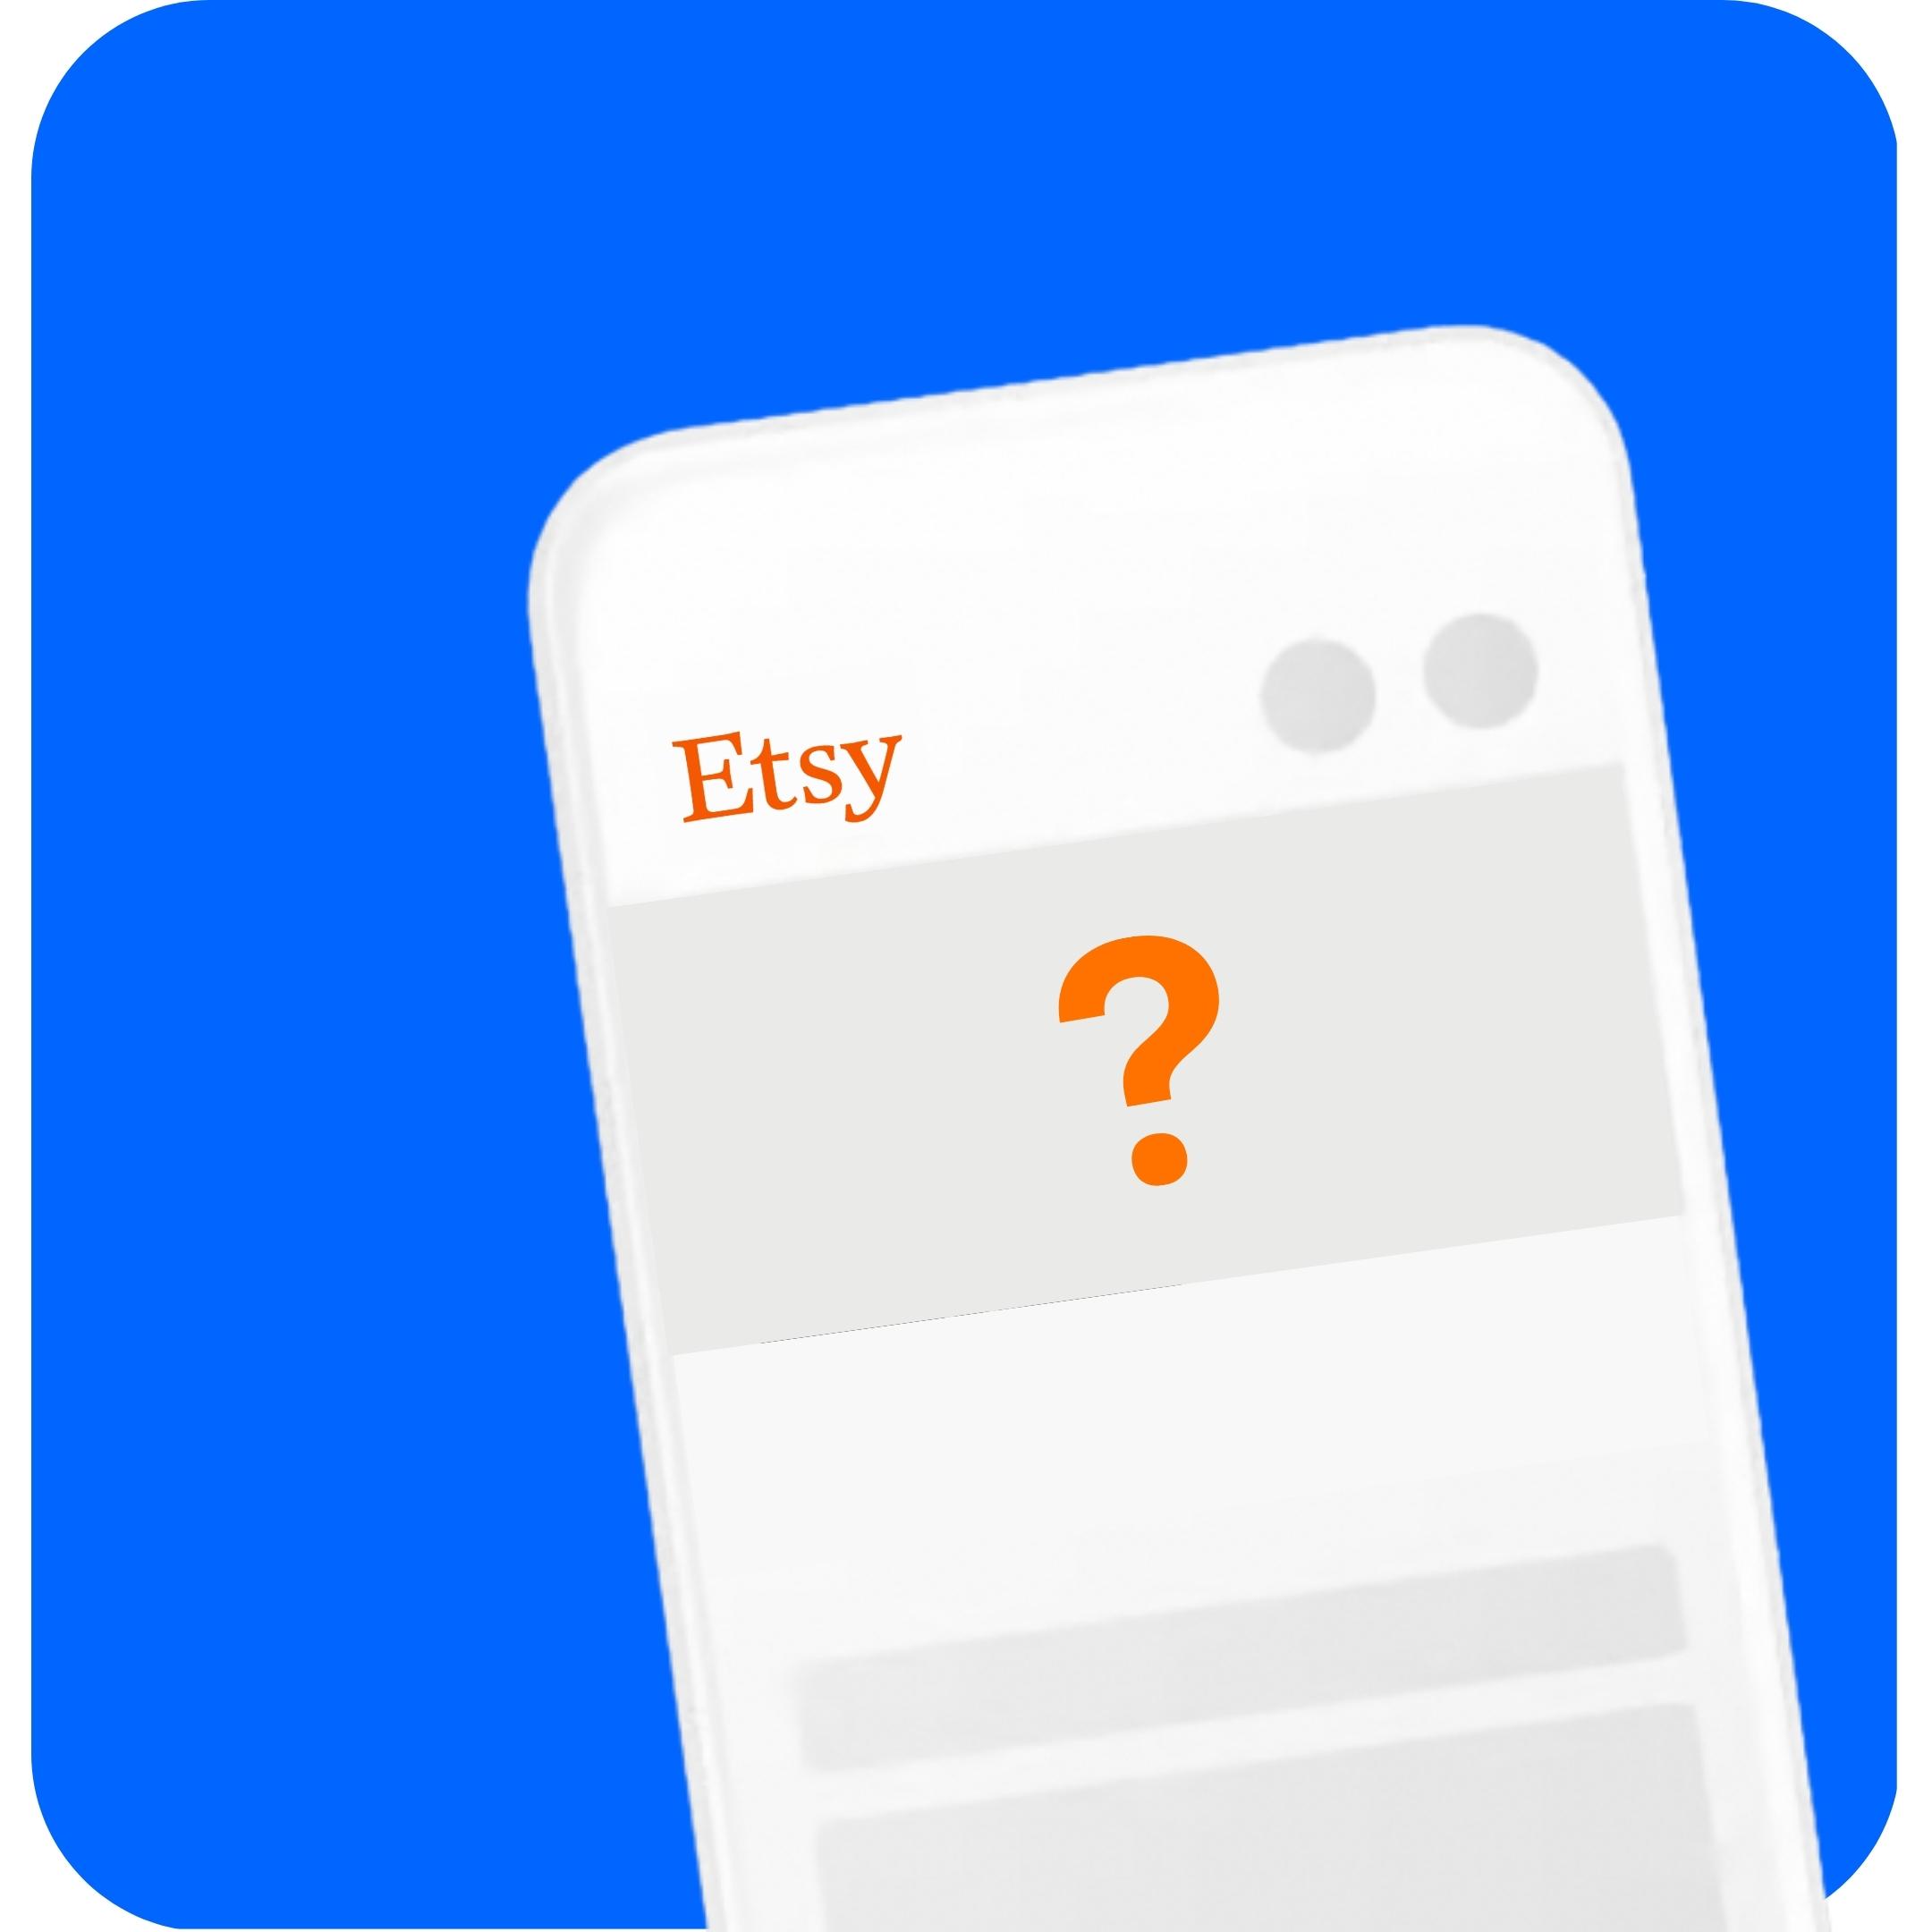 Does Etsy Collect Sales Tax? And Other Questions Multichannel Sellers Need Answers To